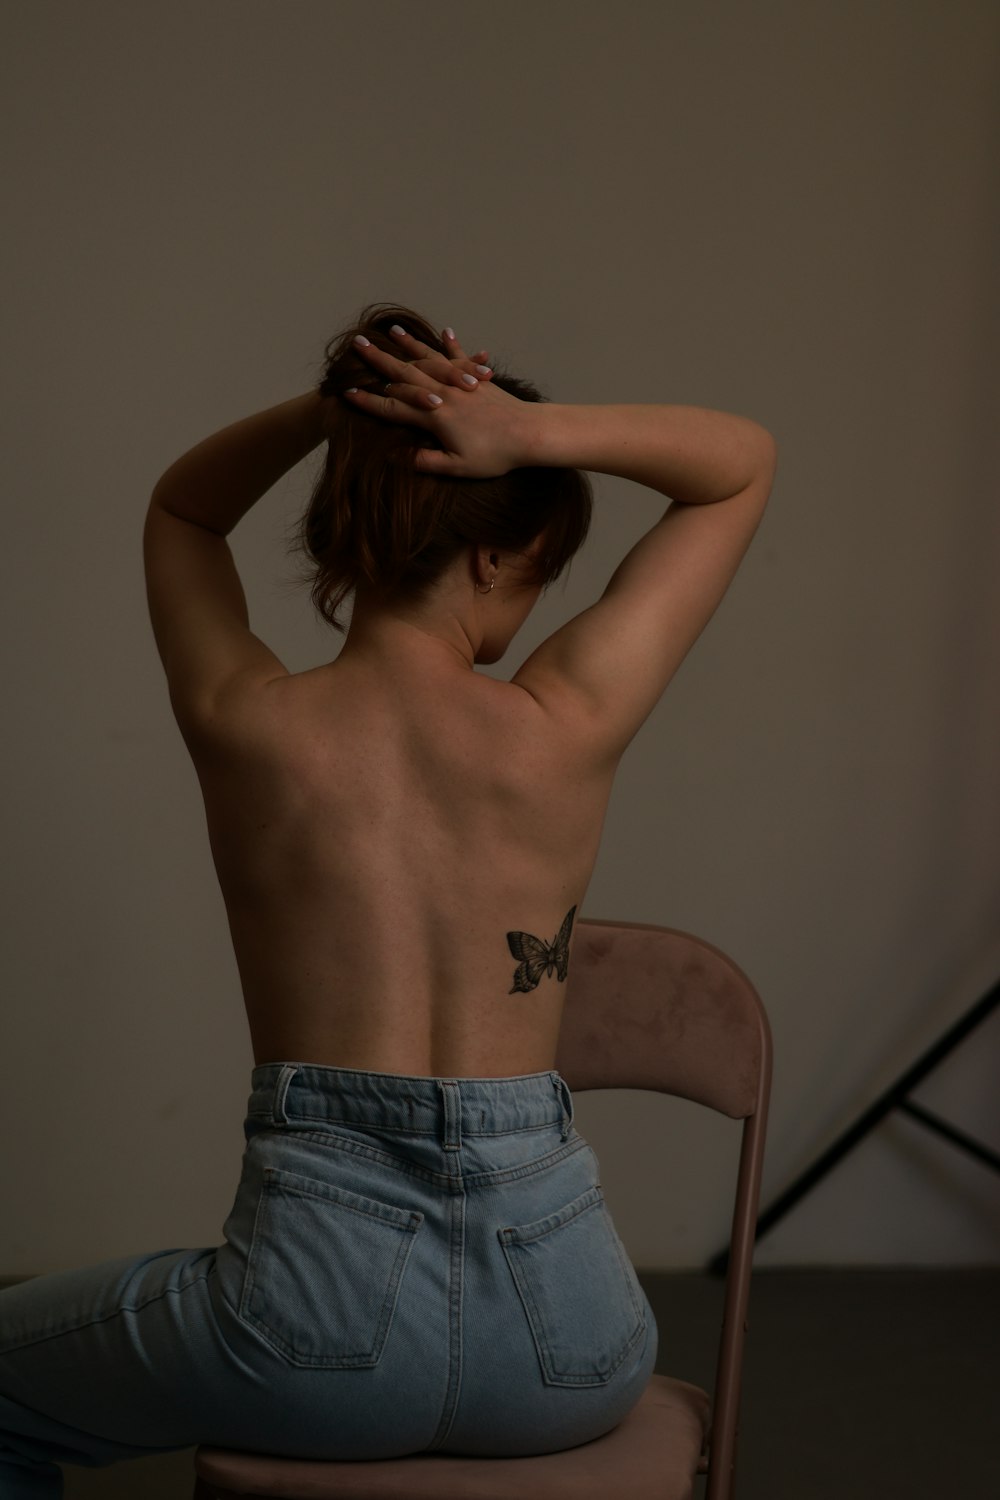 a woman with a tattoo on her back sitting on a chair